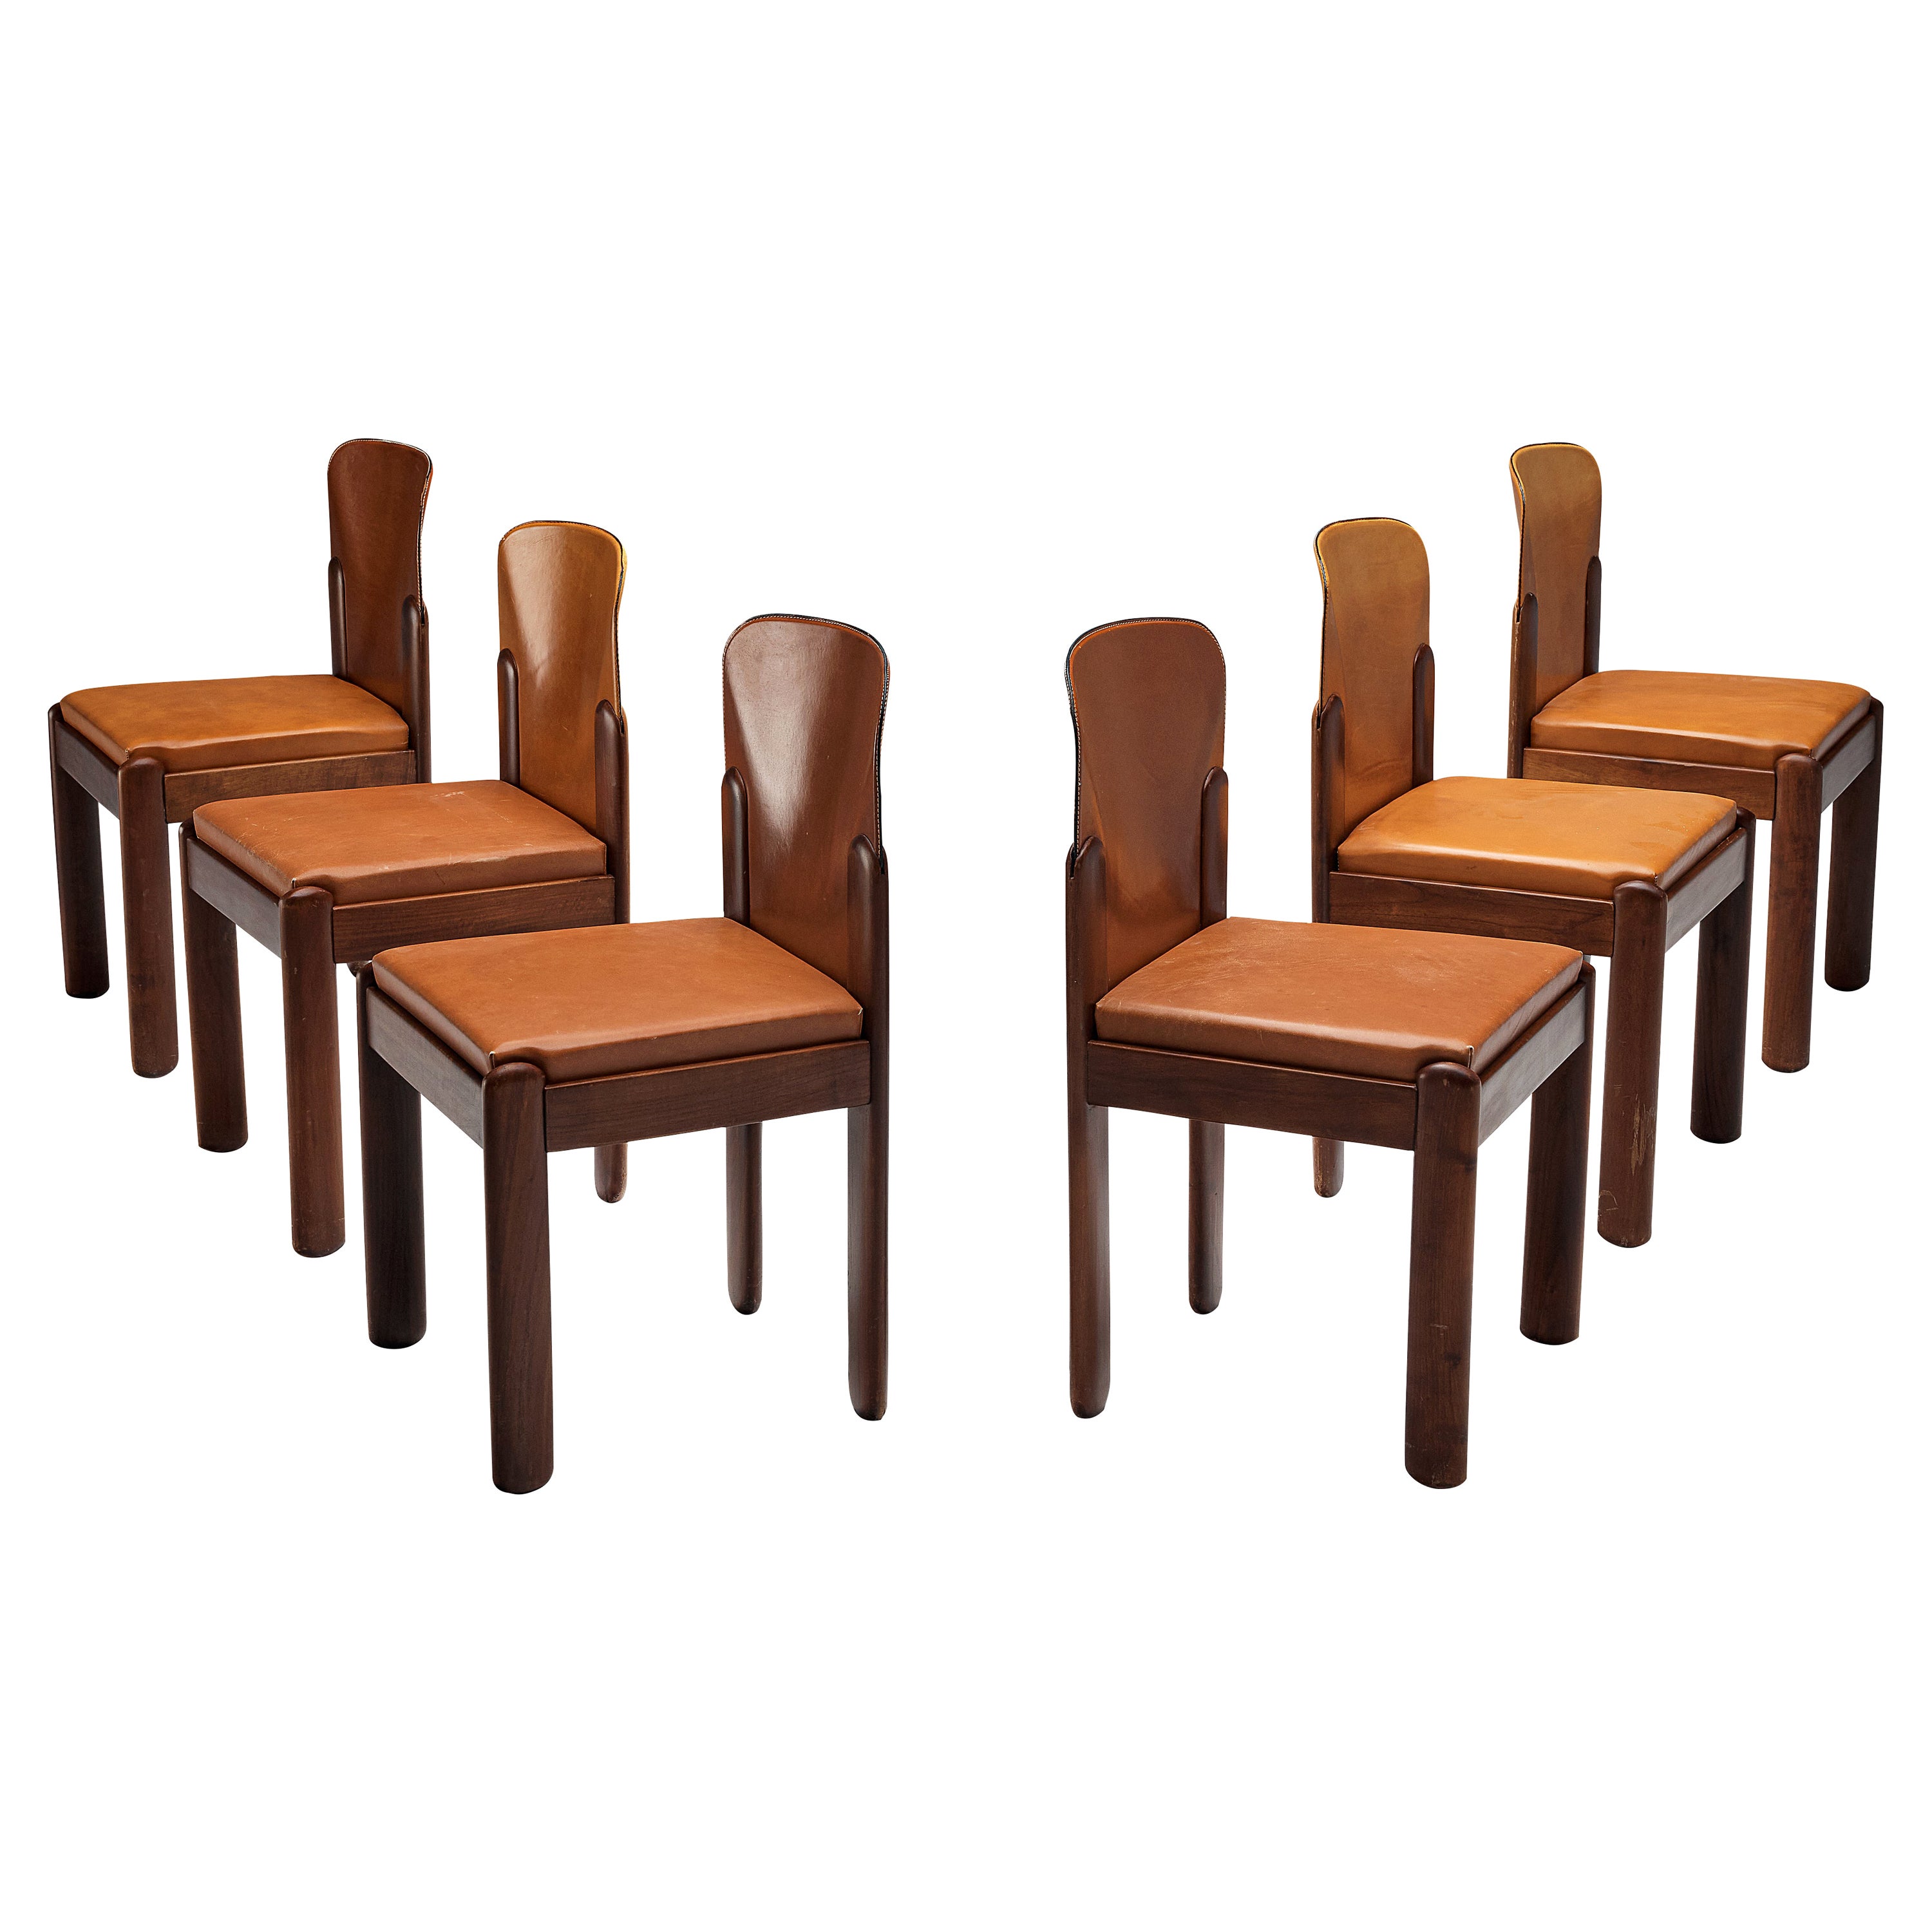 Silvio Coppola for Bernini Set of 6 Dining Chairs in Cognac Leather